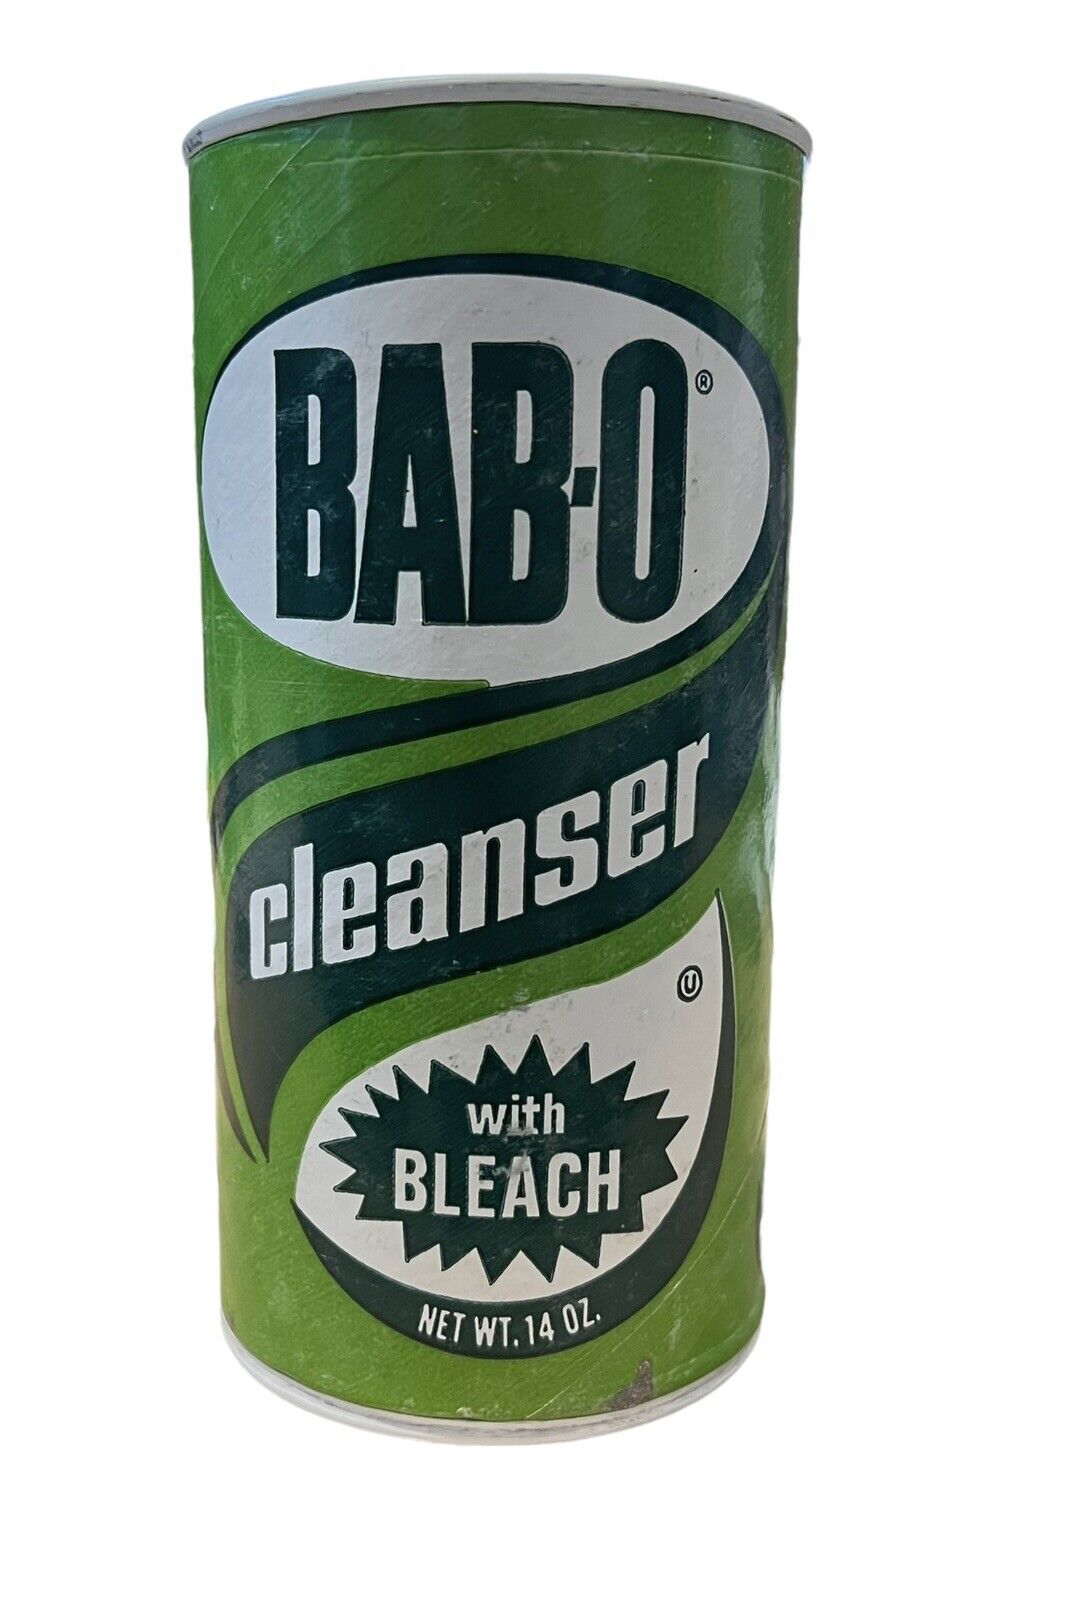 BAB-O Cleanser w/Bleach 14oz Can New Old Stock Retro Vintage